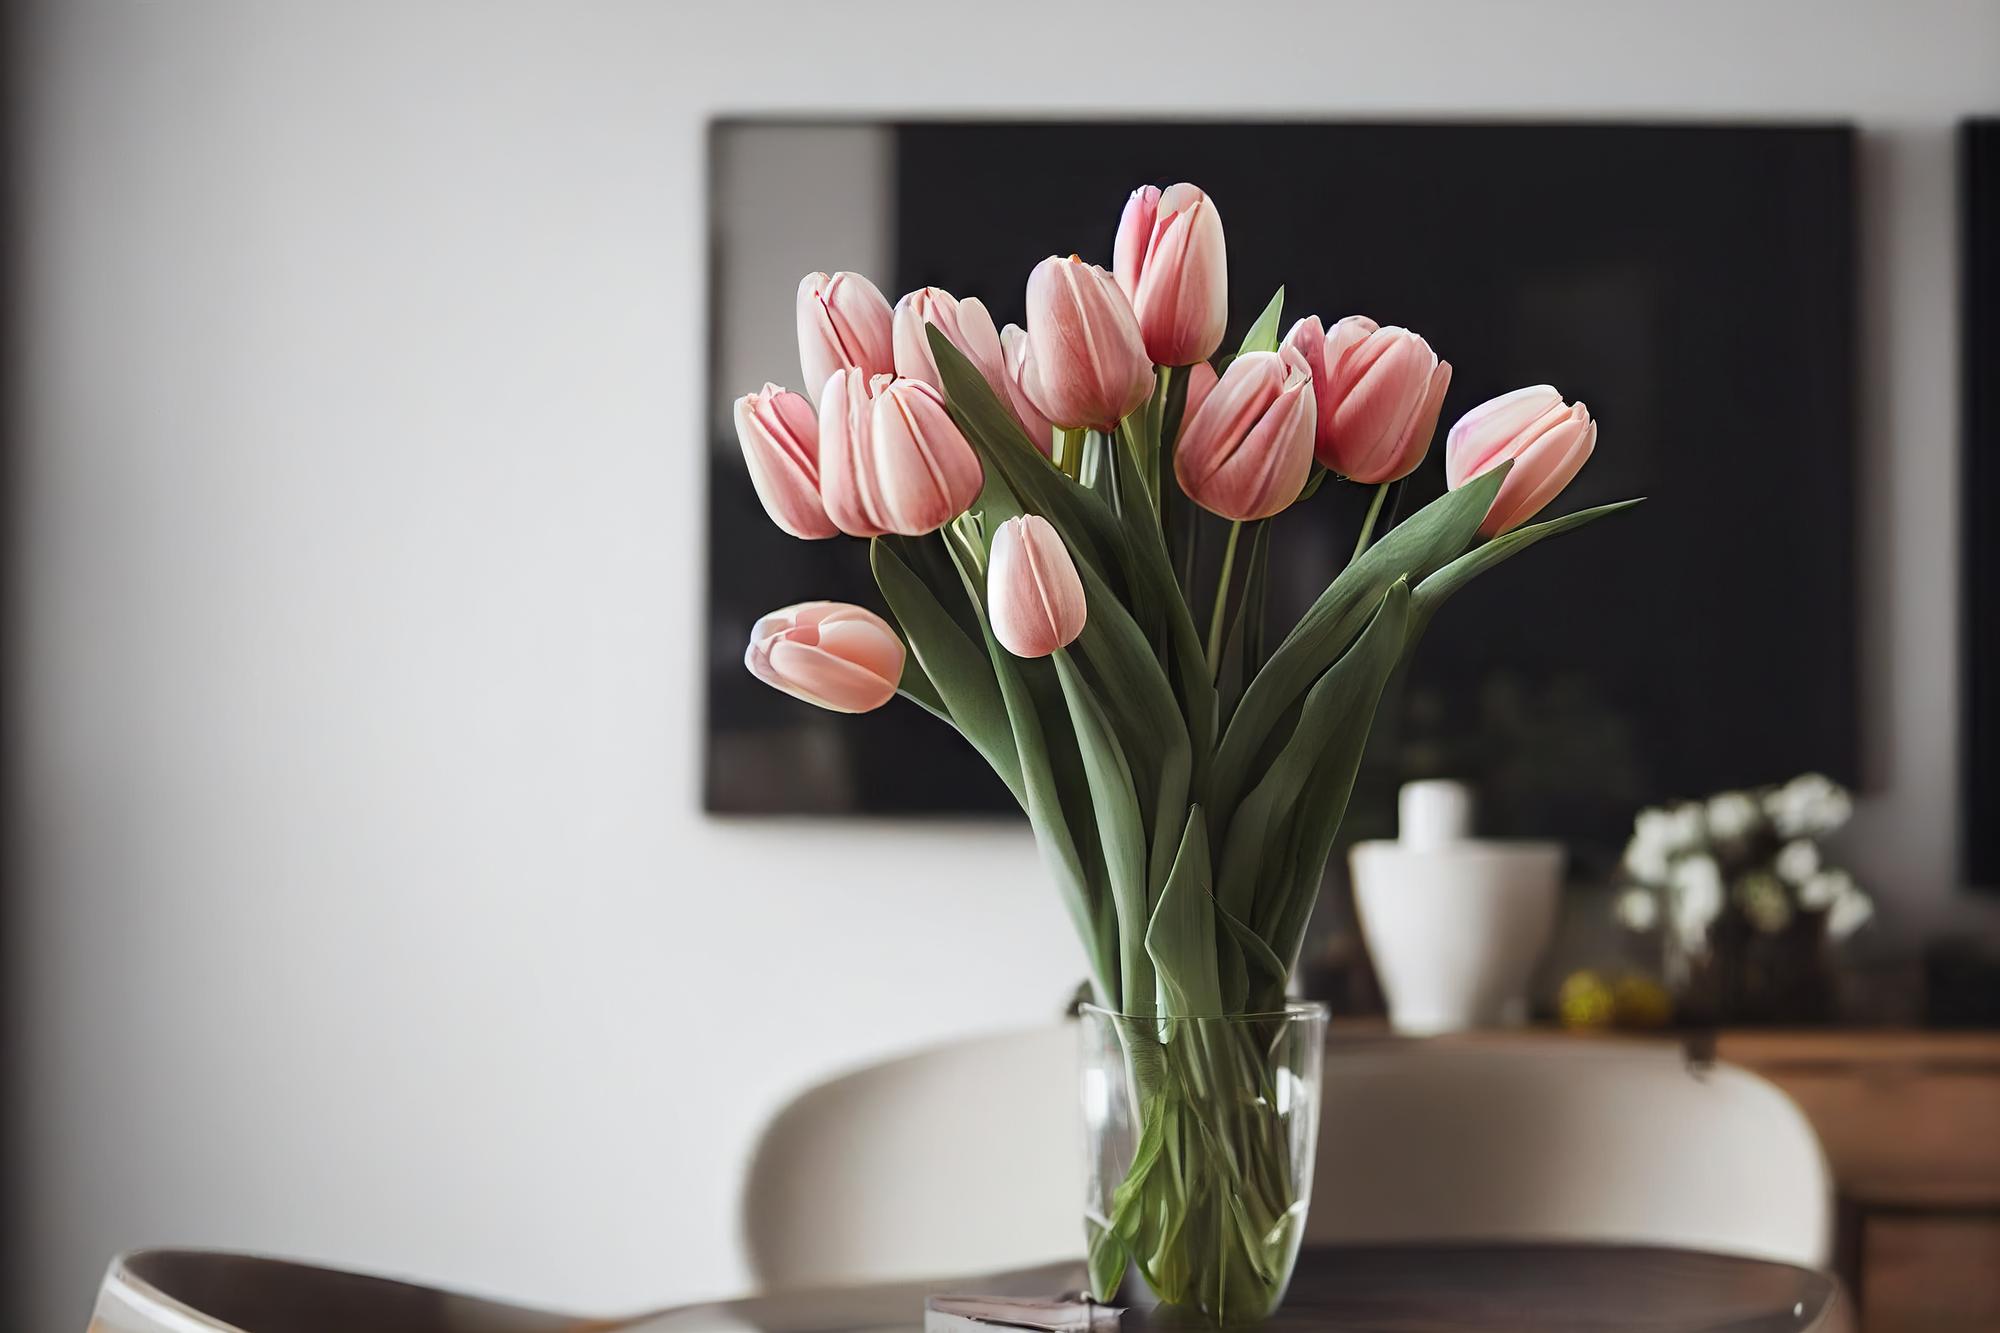 Tips For Growing Tulips In An Indoor Environment